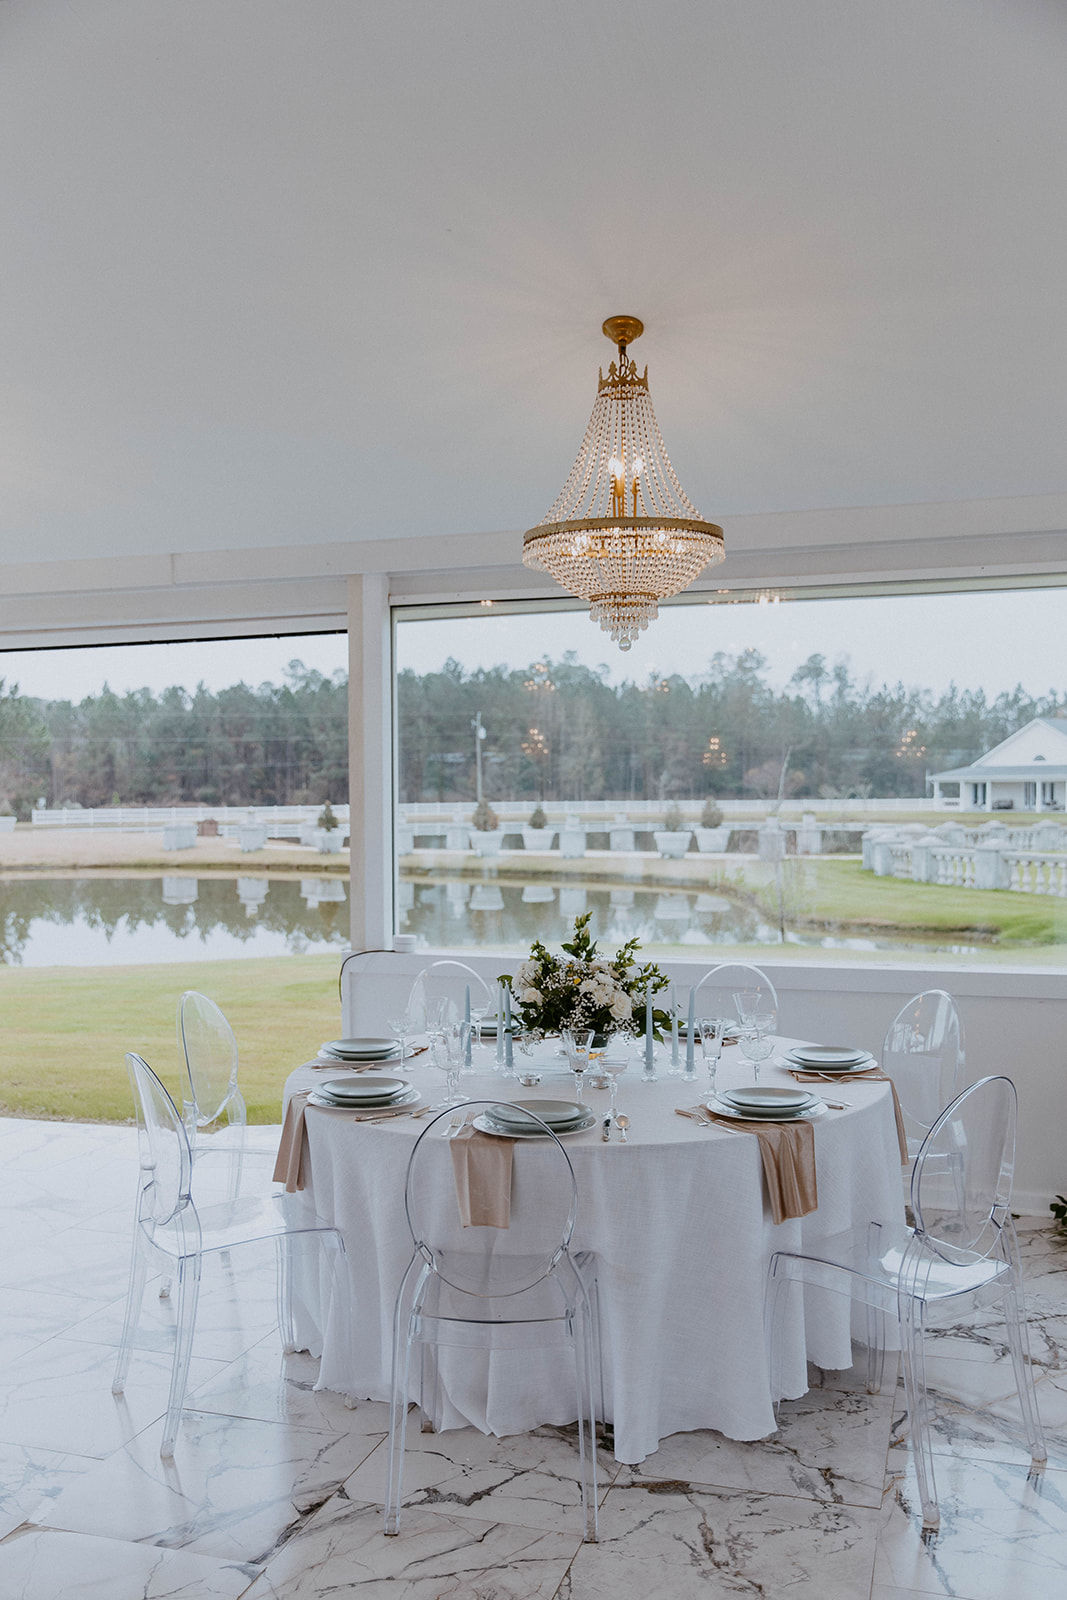 Elegant dining setup with a round table, ghost chairs, and a chandelier, overlooking a lake through large windows.